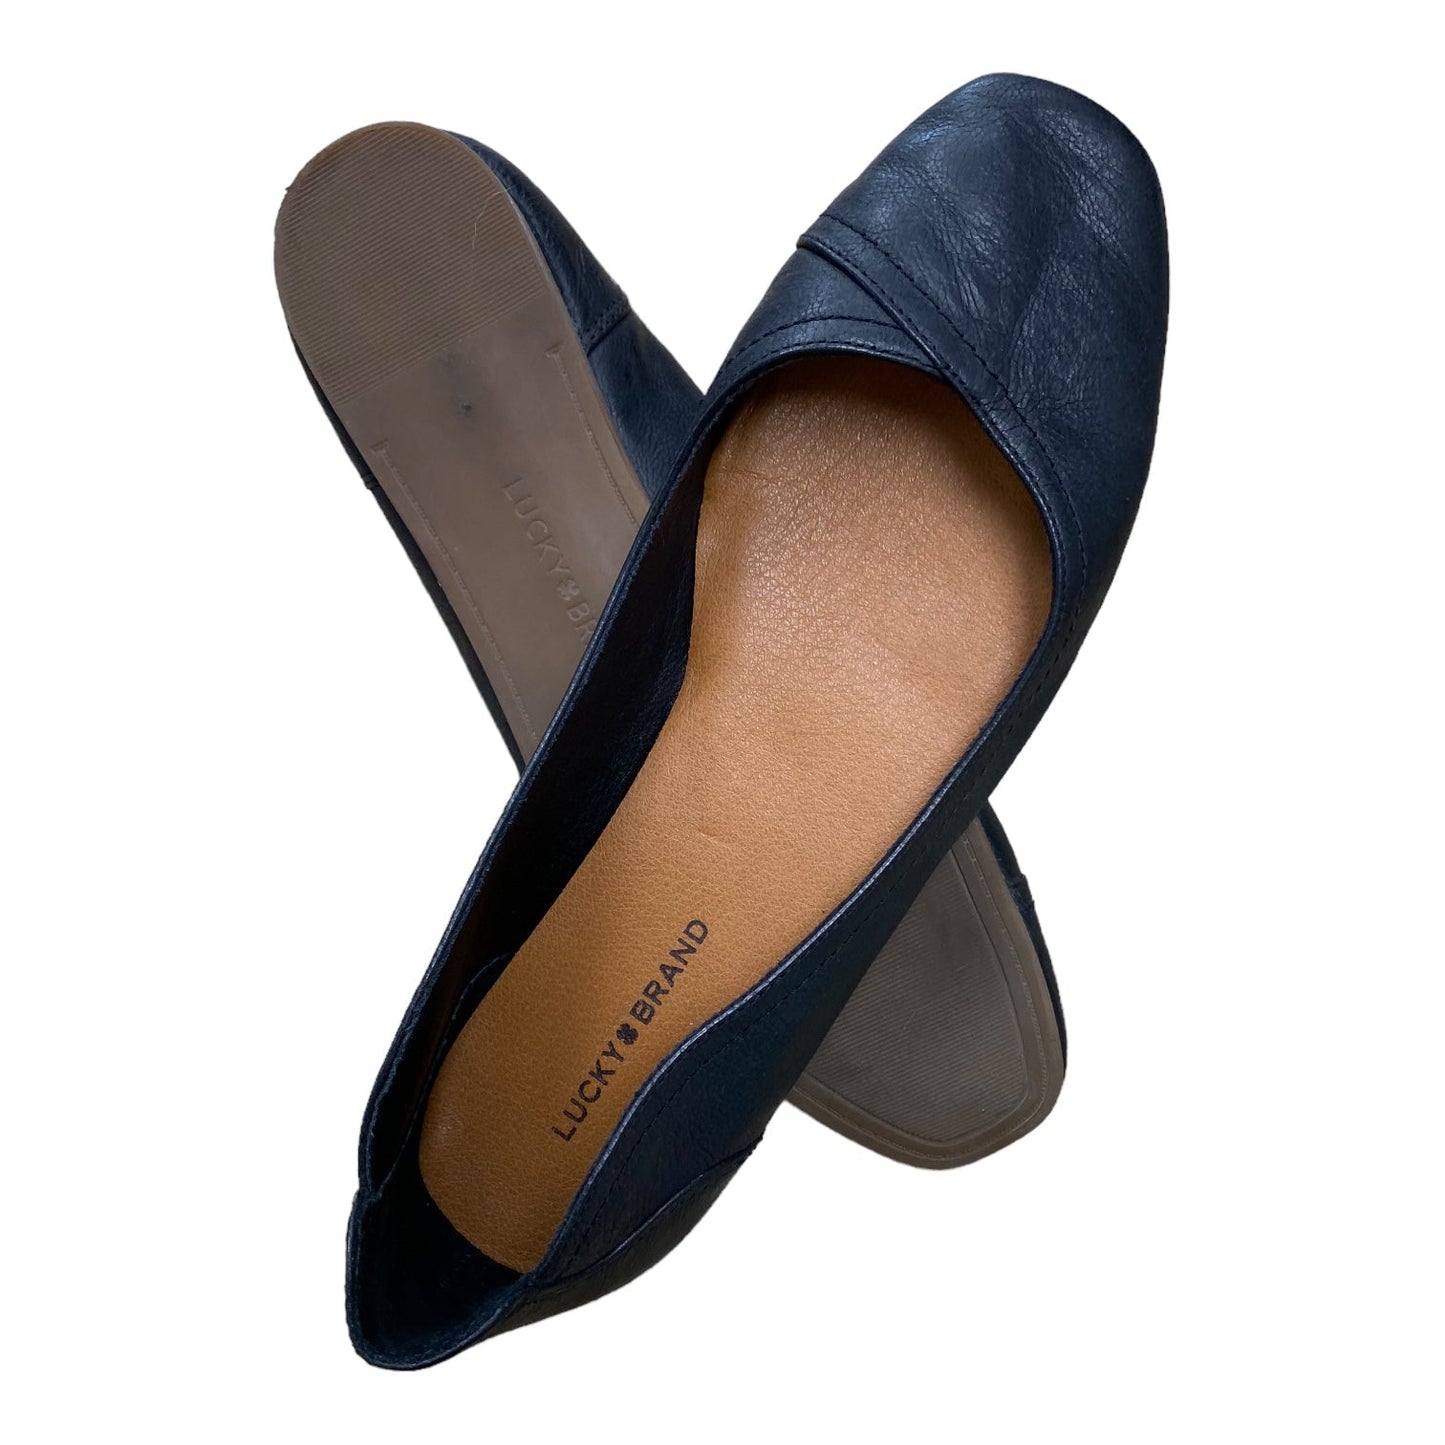 Black Shoes Flats Lucky Brand, Size 8